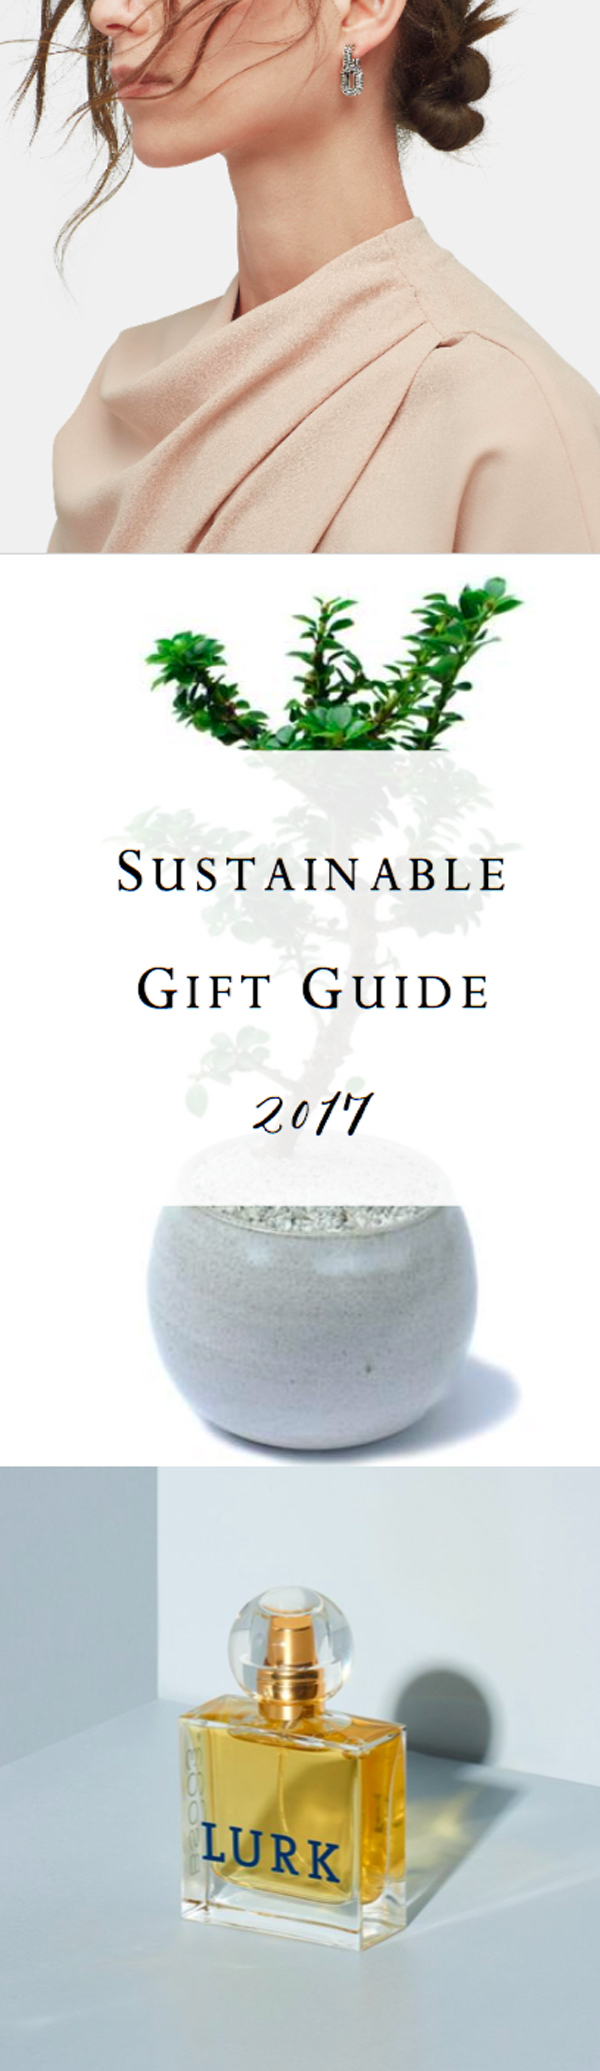 This Luxe Sustainable Gift Guide Is A Perfect Blend Of Glam Style & Ethical Giving